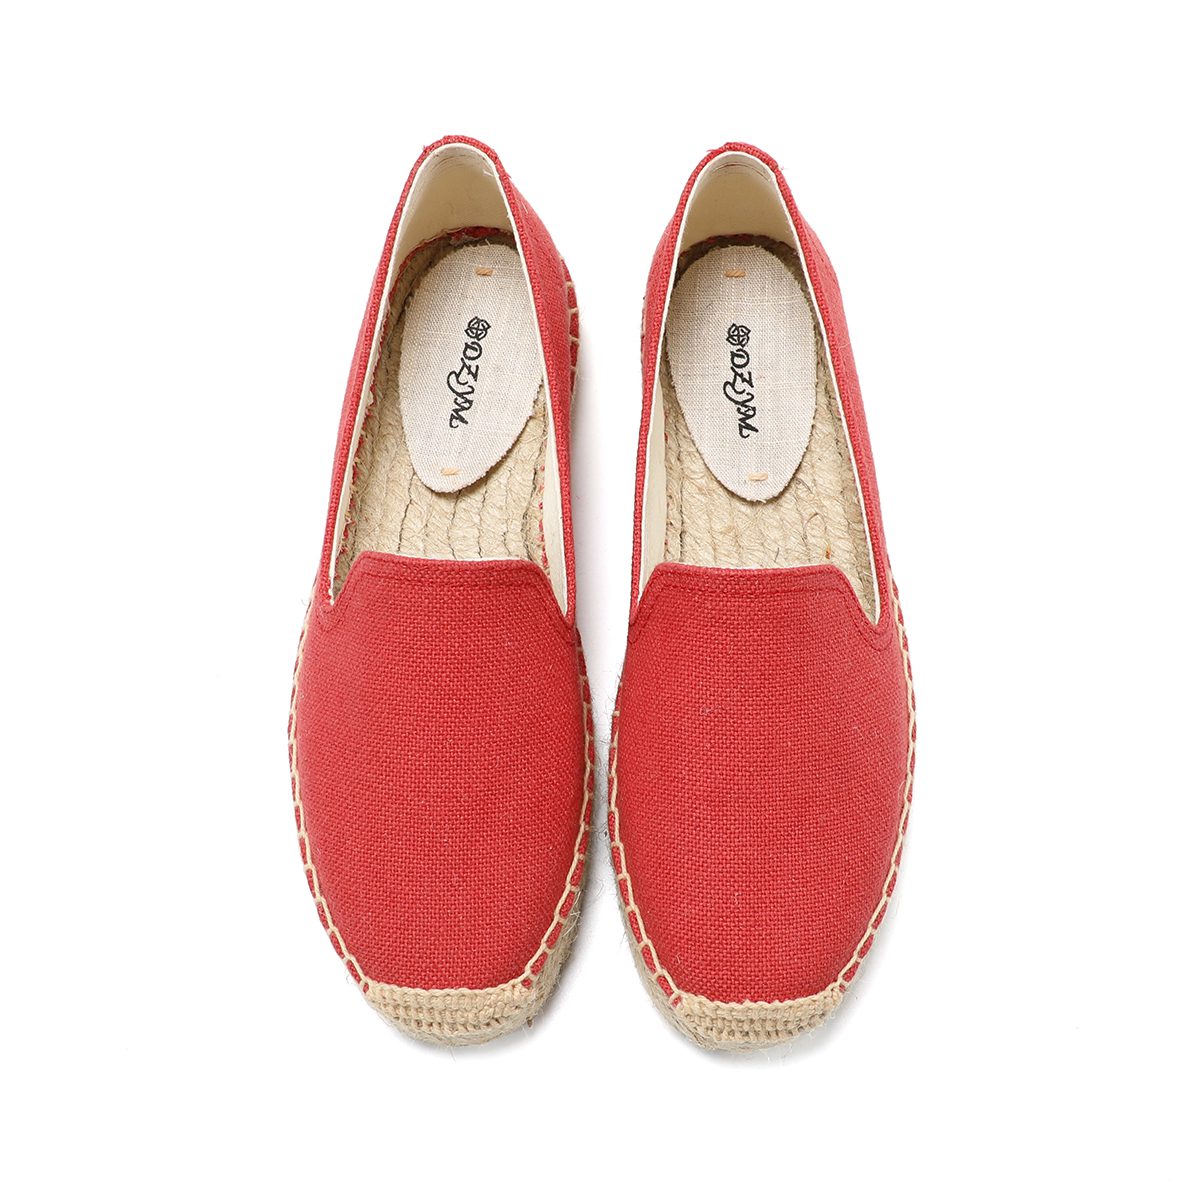 2021 New Arrival Rushed Casual Spring/autumn Hemp Round Toe Rubber Slip-on Solid Sapatos Zapatillas Mujer Espadrilles Flat